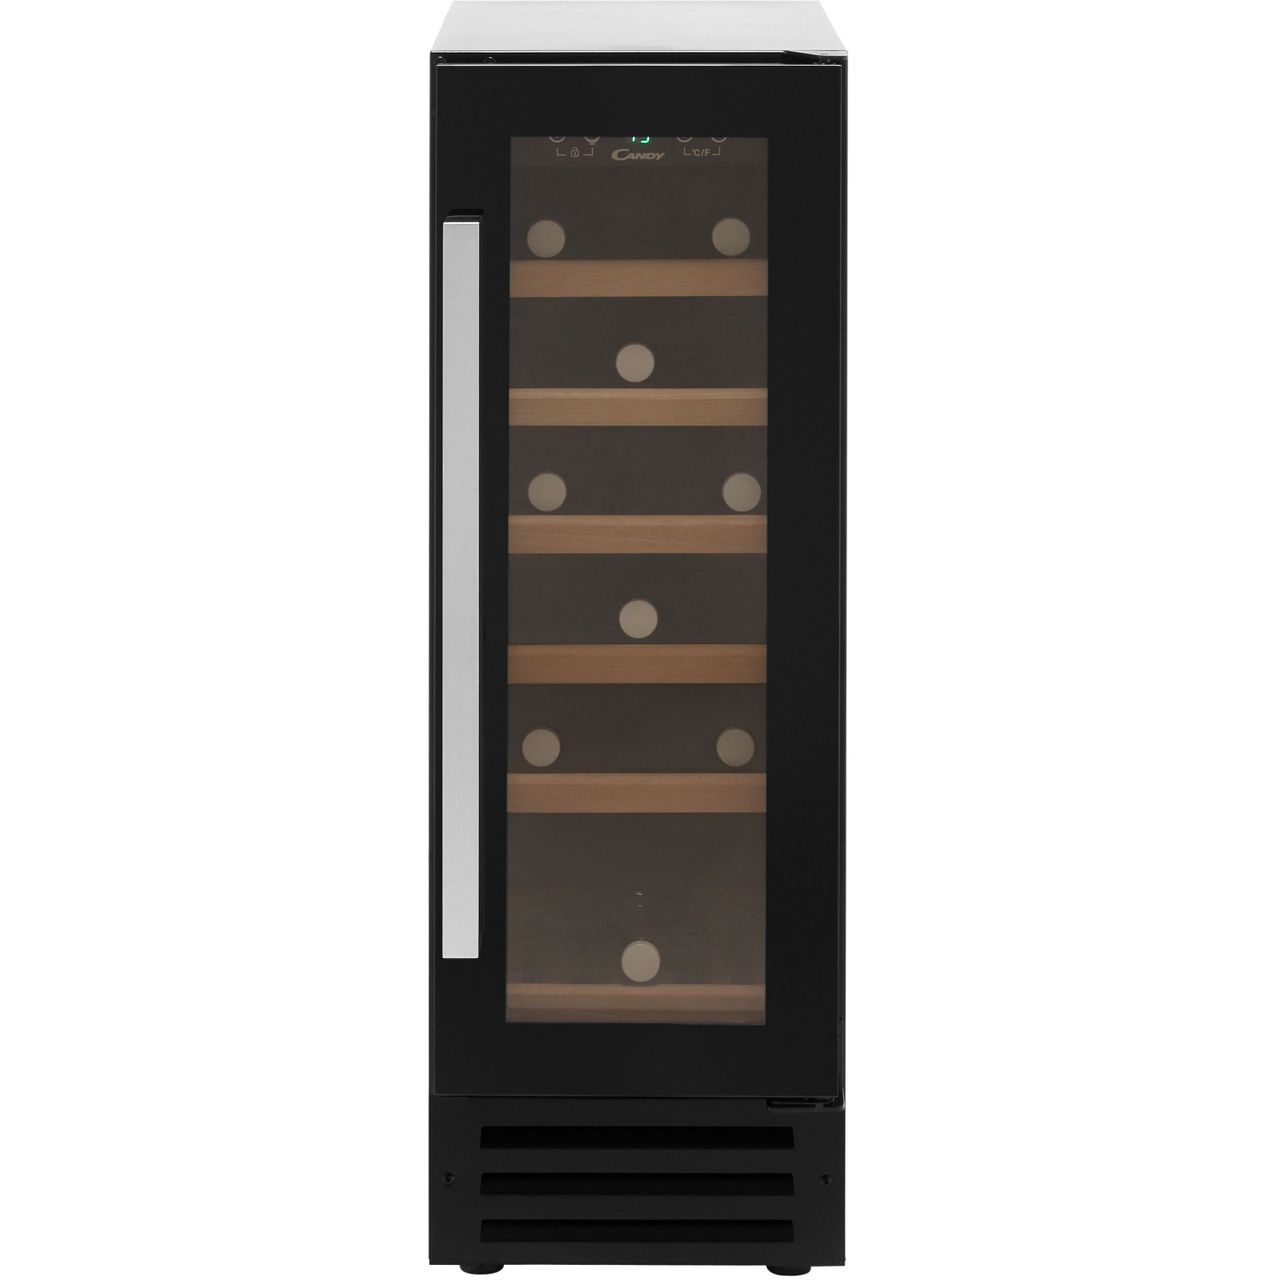 Candy CCVB30 Built In Wine Cooler Review